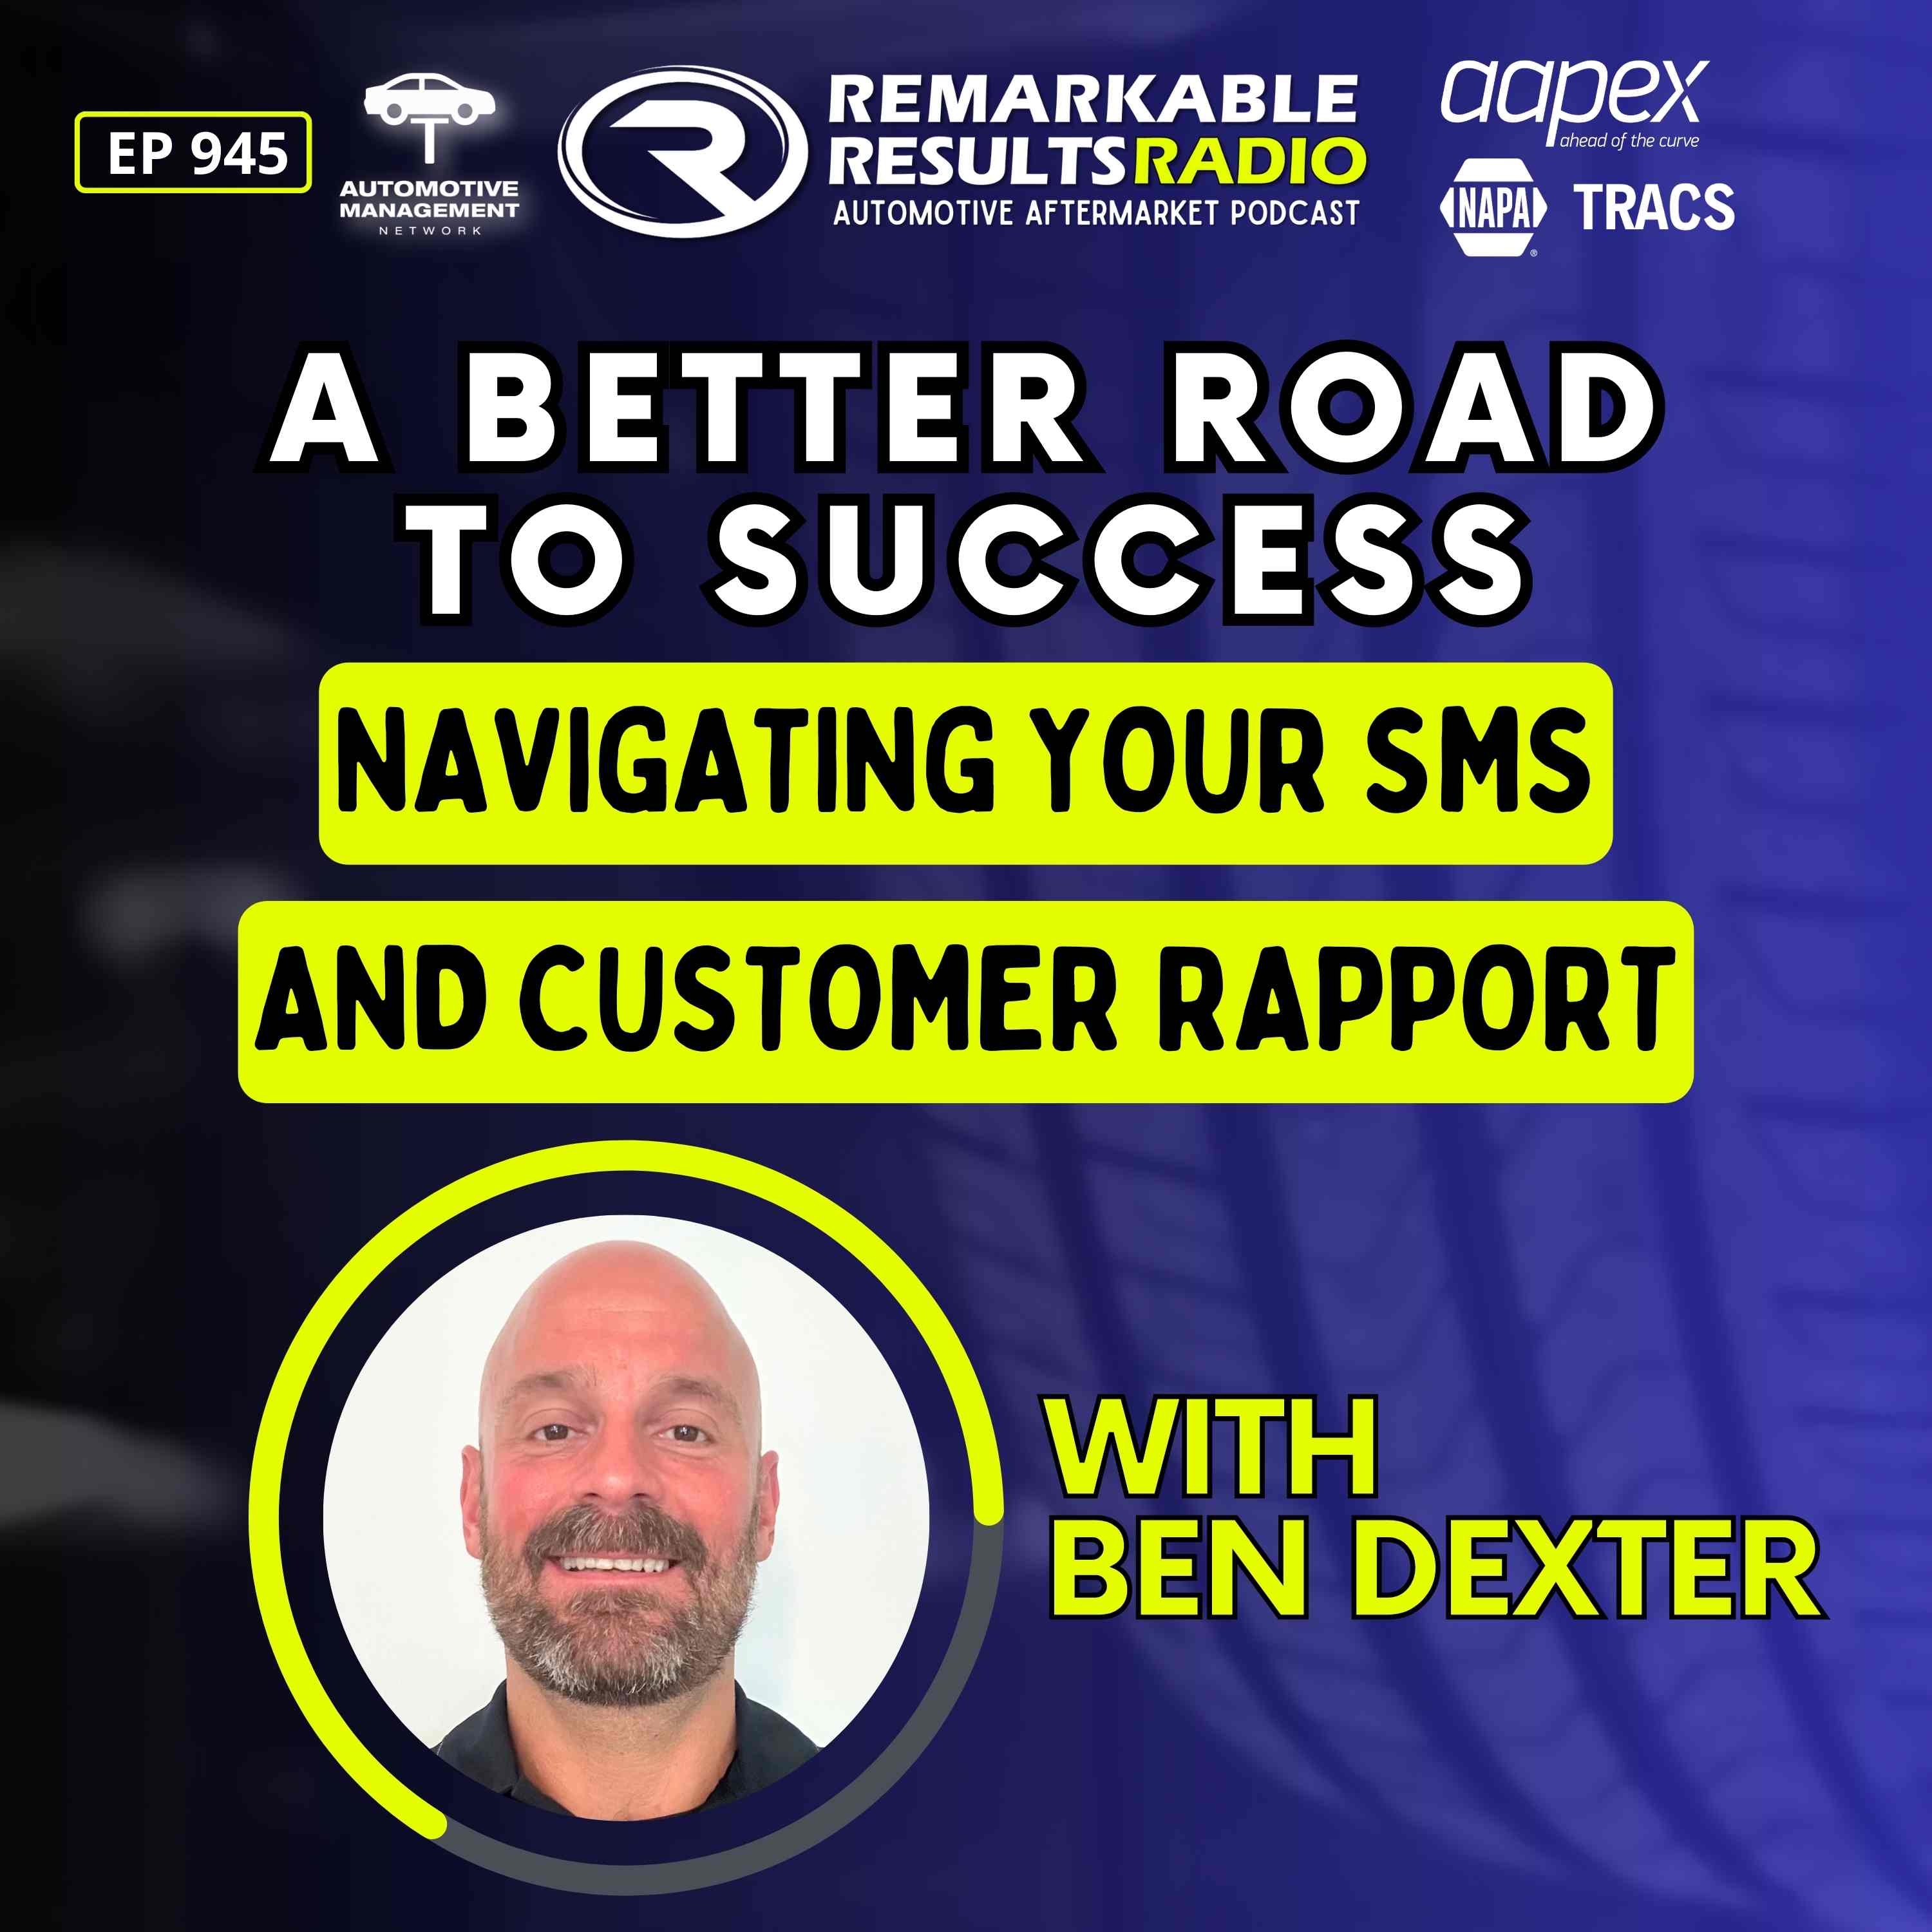 A Better Road to Success: Navigating Your SMS and Customer Rapport [RR 945]